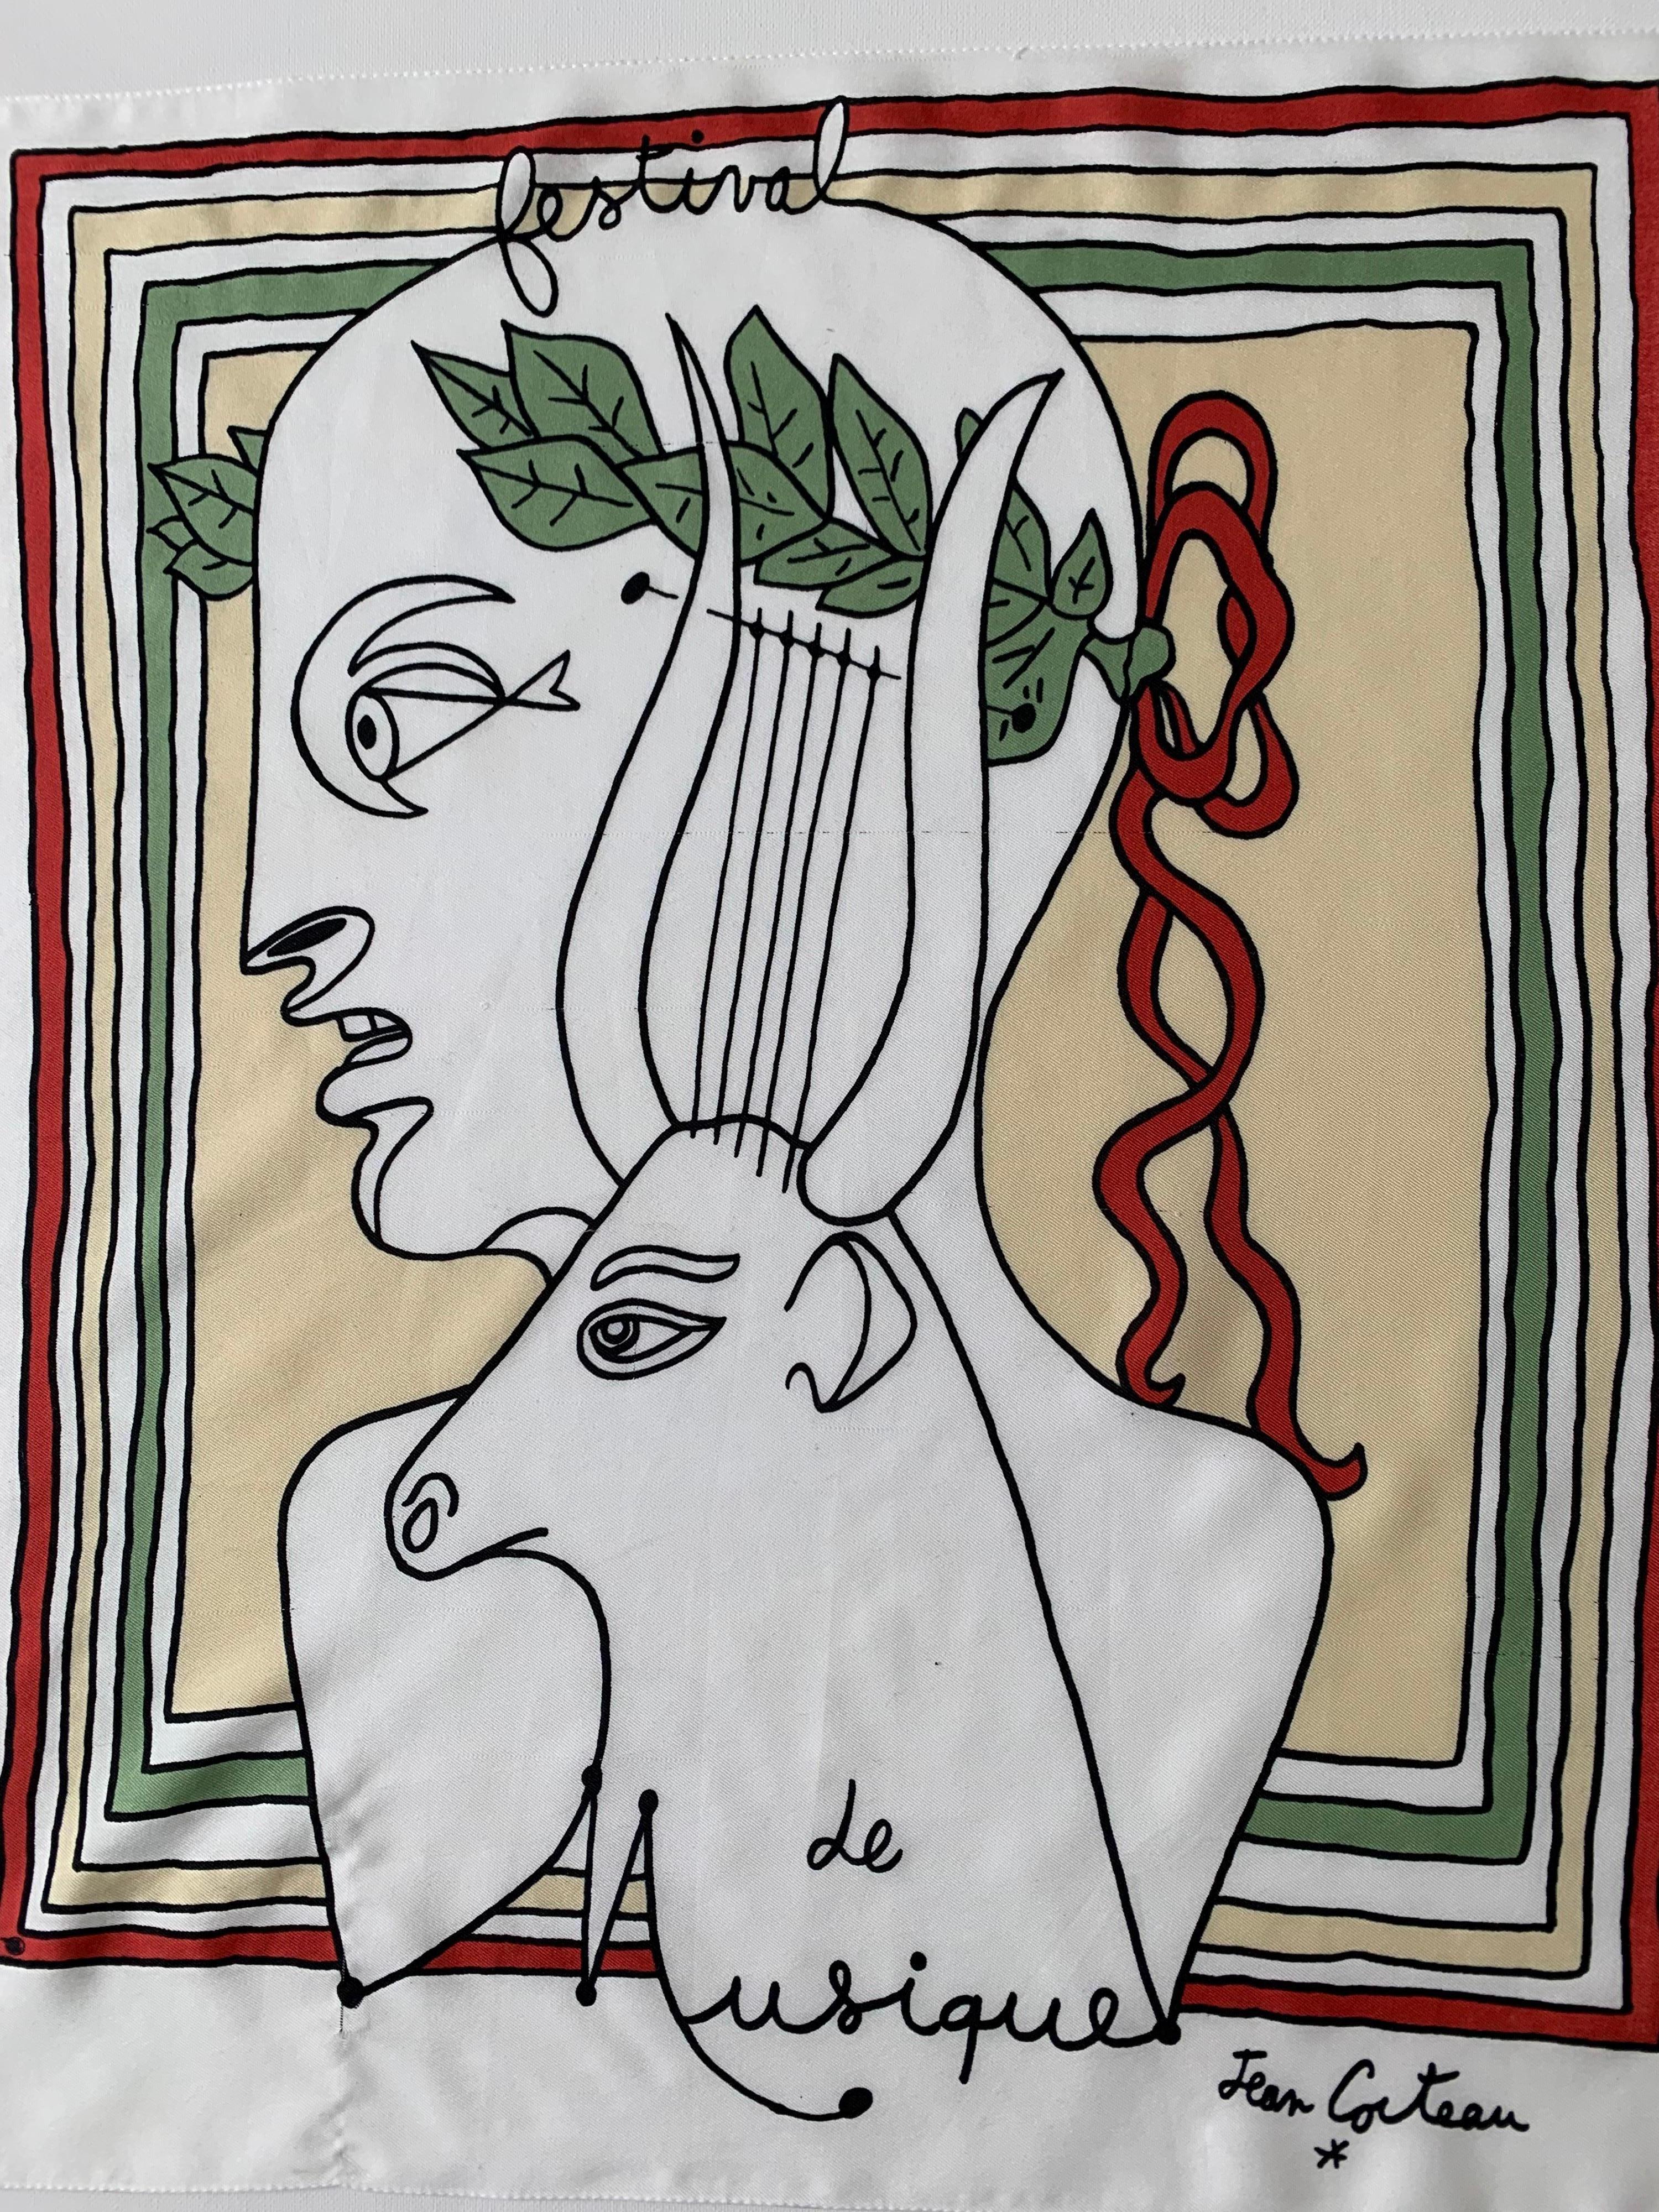 Collectible scarf by the artist Jean Cocteau. Features a profile of a head with the symbolic of a harp and an ox 